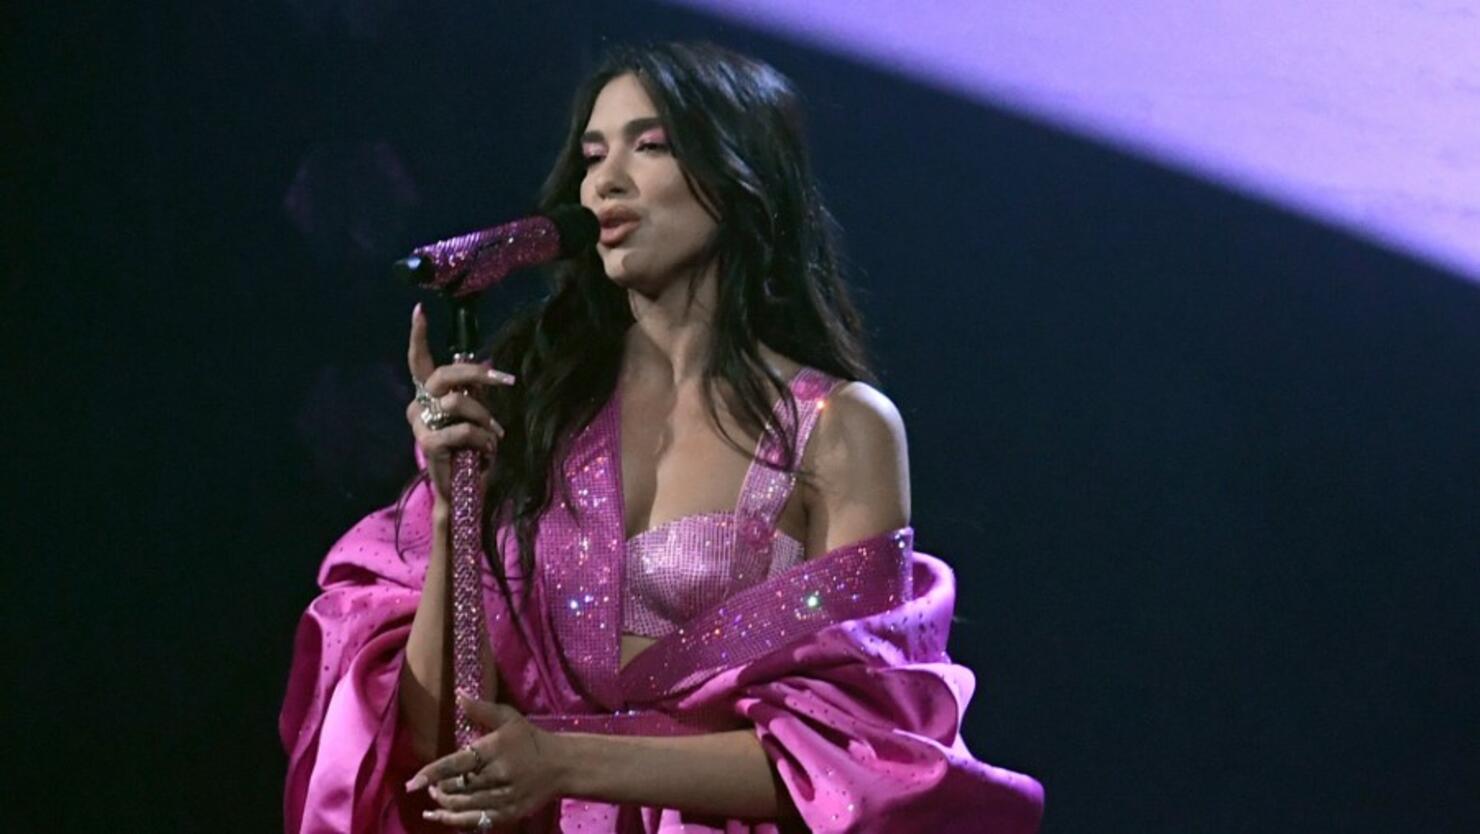 Dua Lipa Delivers Glitz & Glam With DaBaby During 2021 Grammys Performance